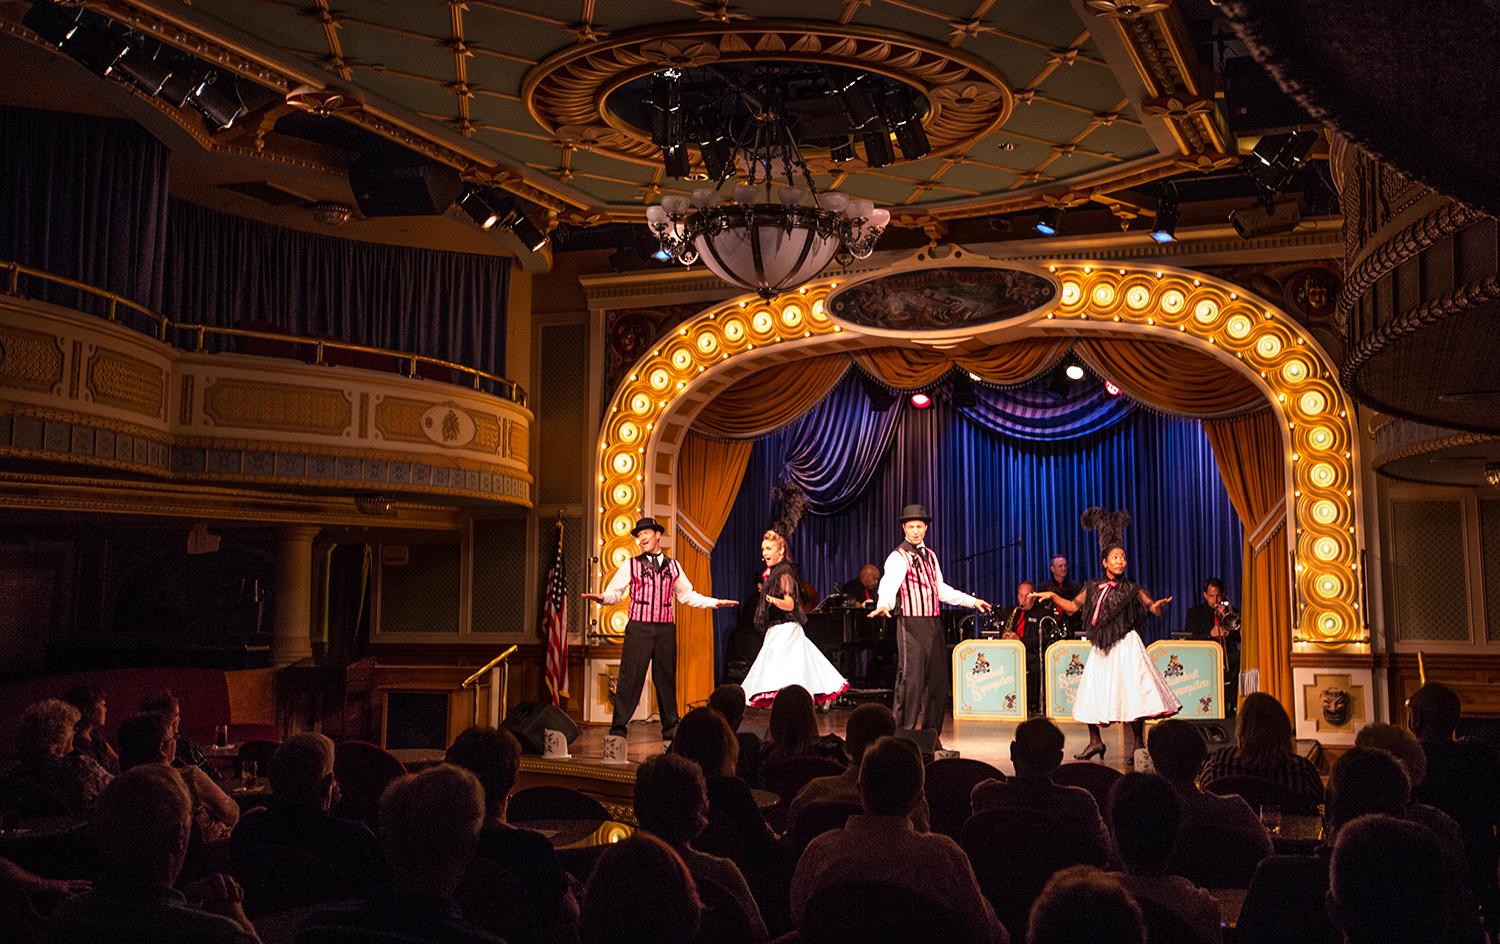 Centre stage: inside the Grand Saloon Theater